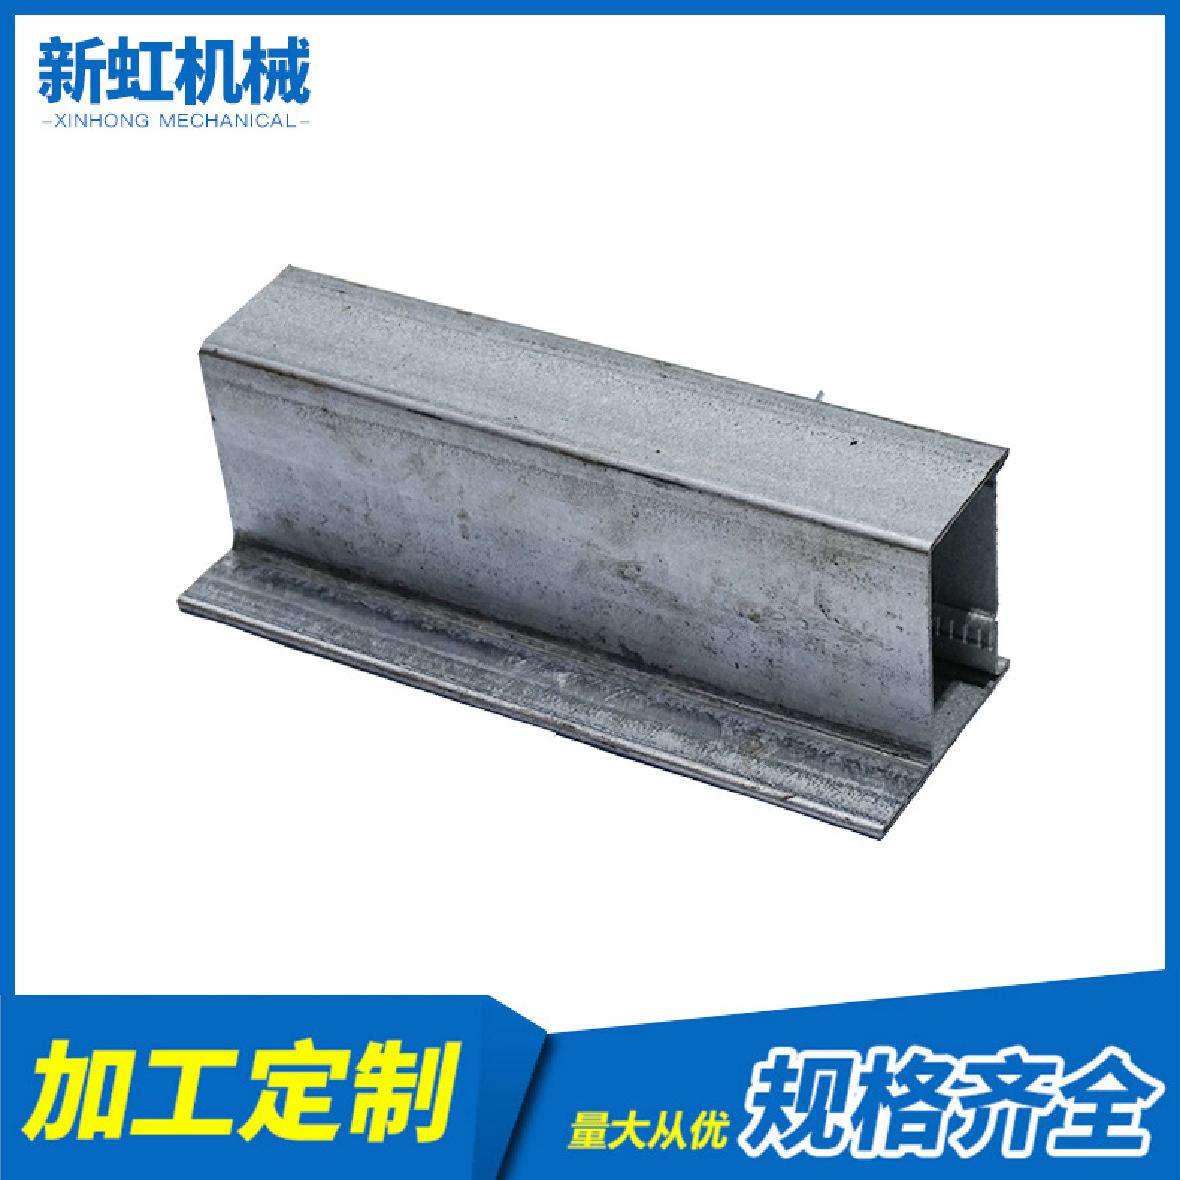 50 series No. 1 material, fixed window frame